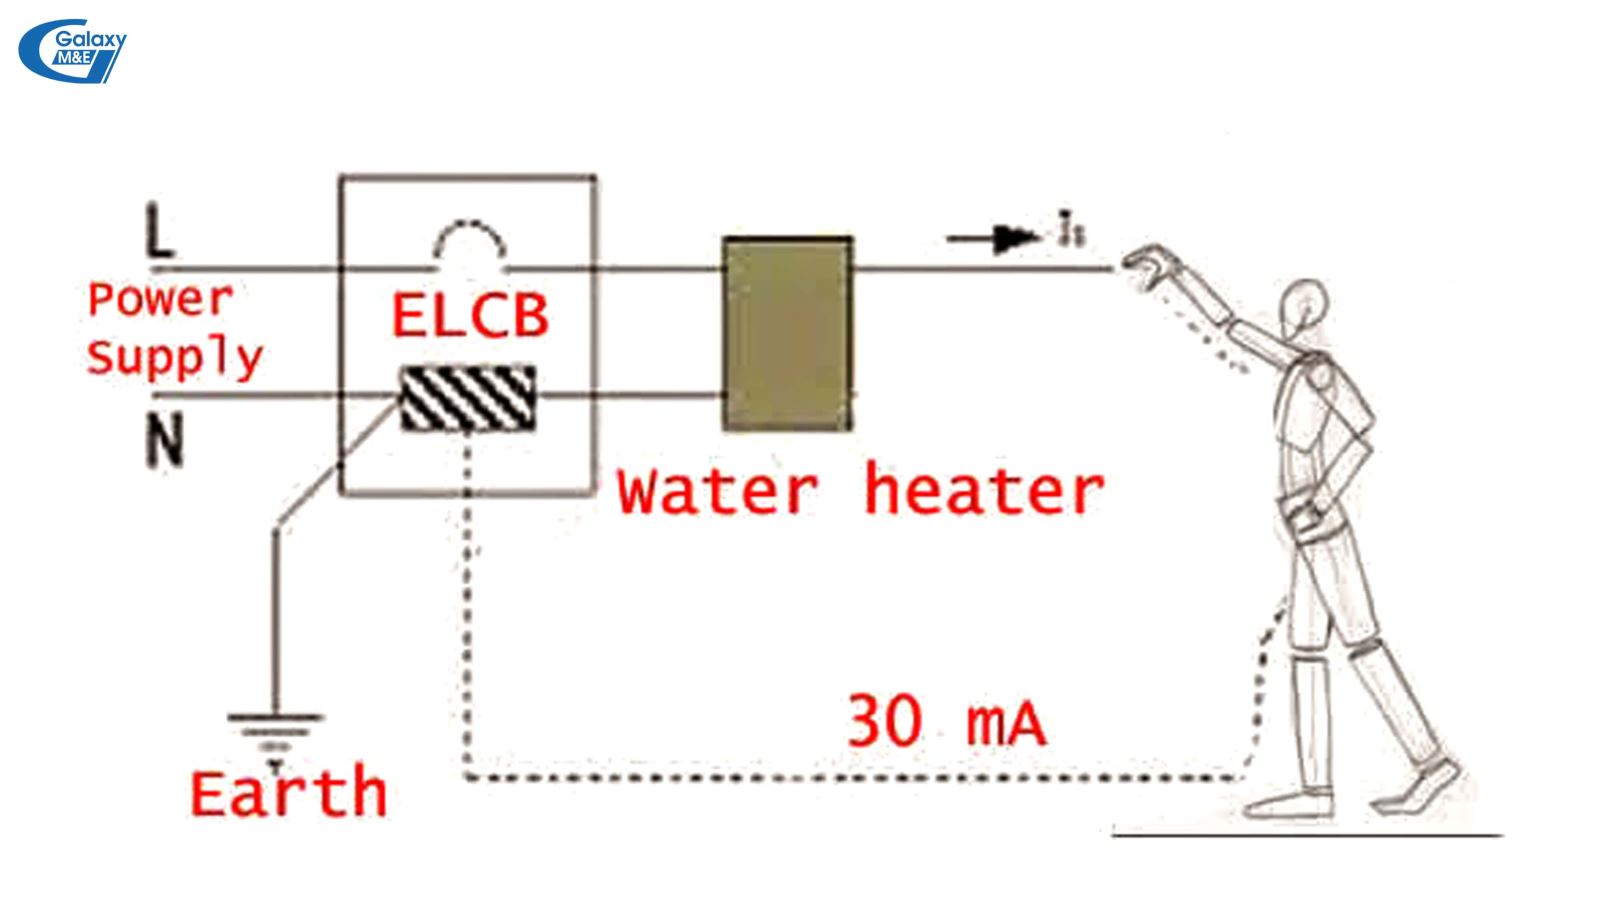 Electric leakage protection devices are often found in hot water tanks, and circuit breakers.